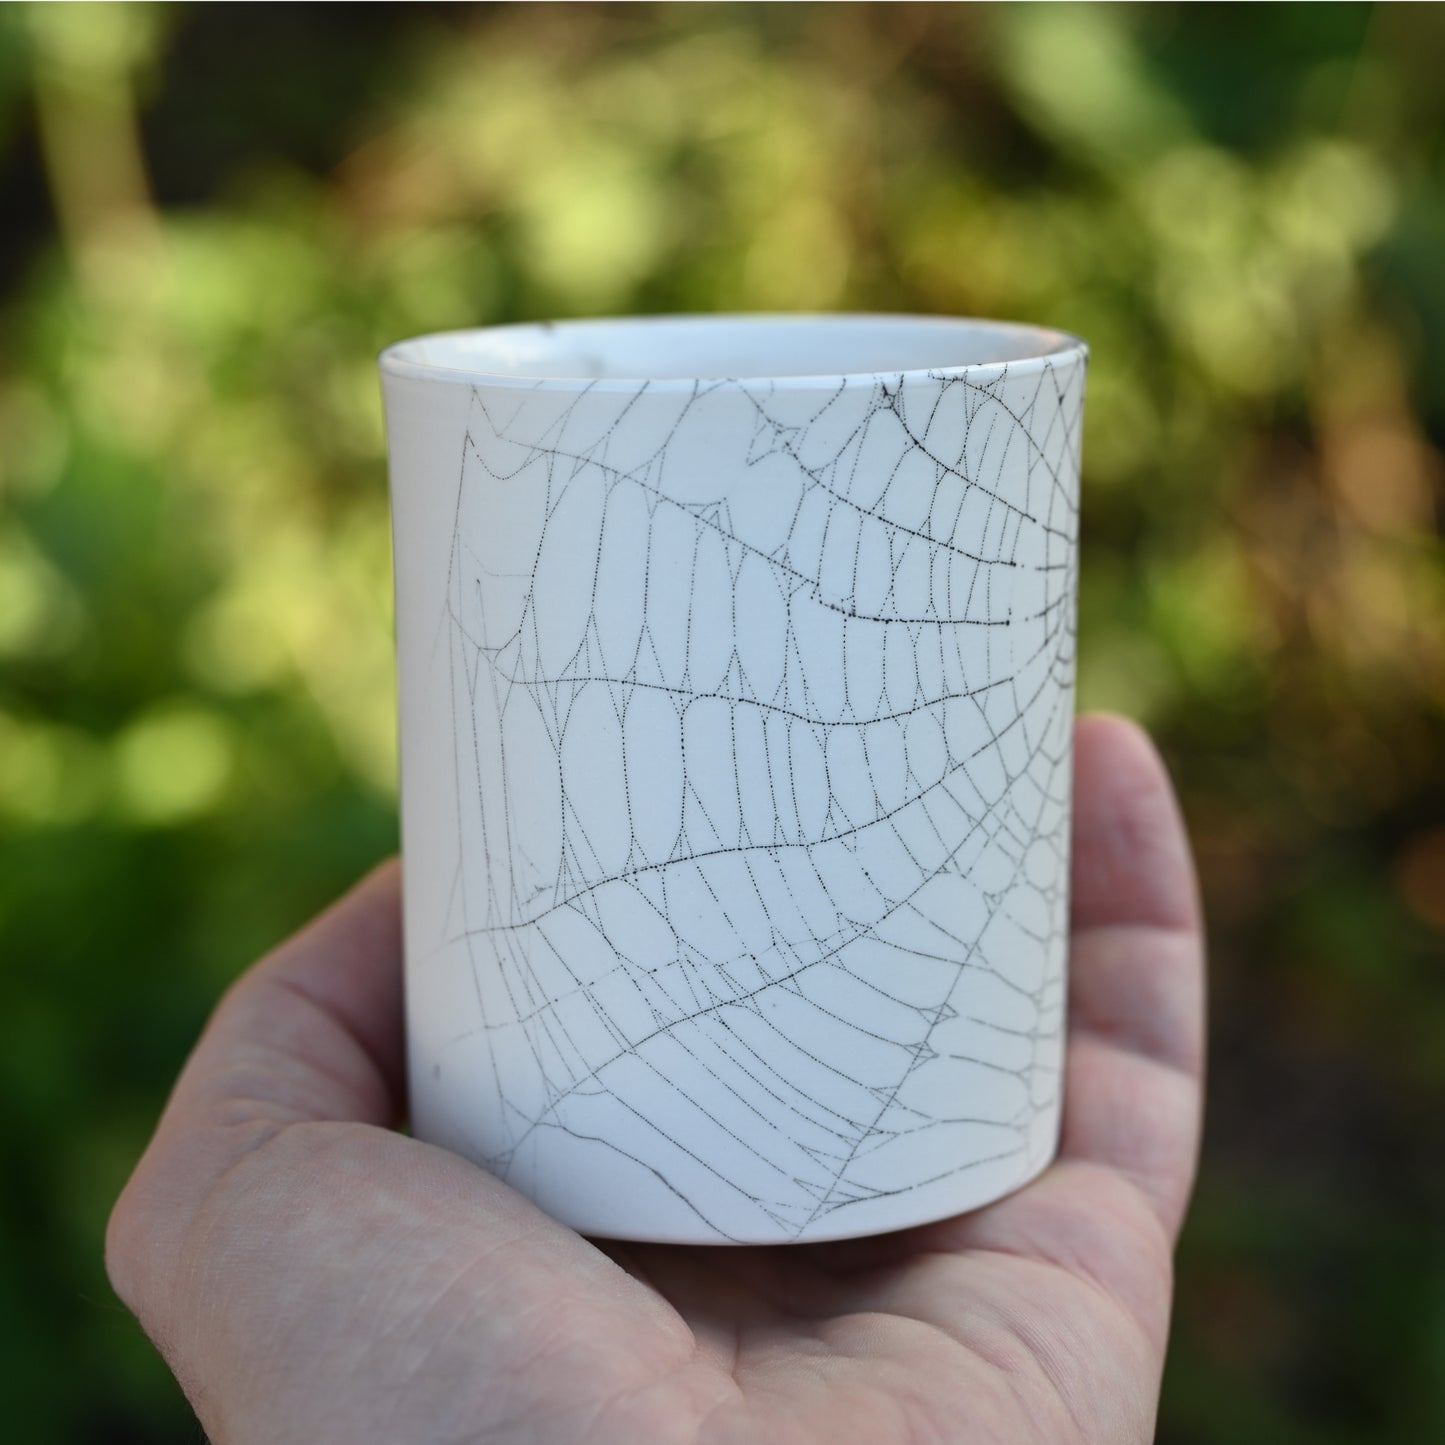 Web on Clay (214), Collected September 24, 2022